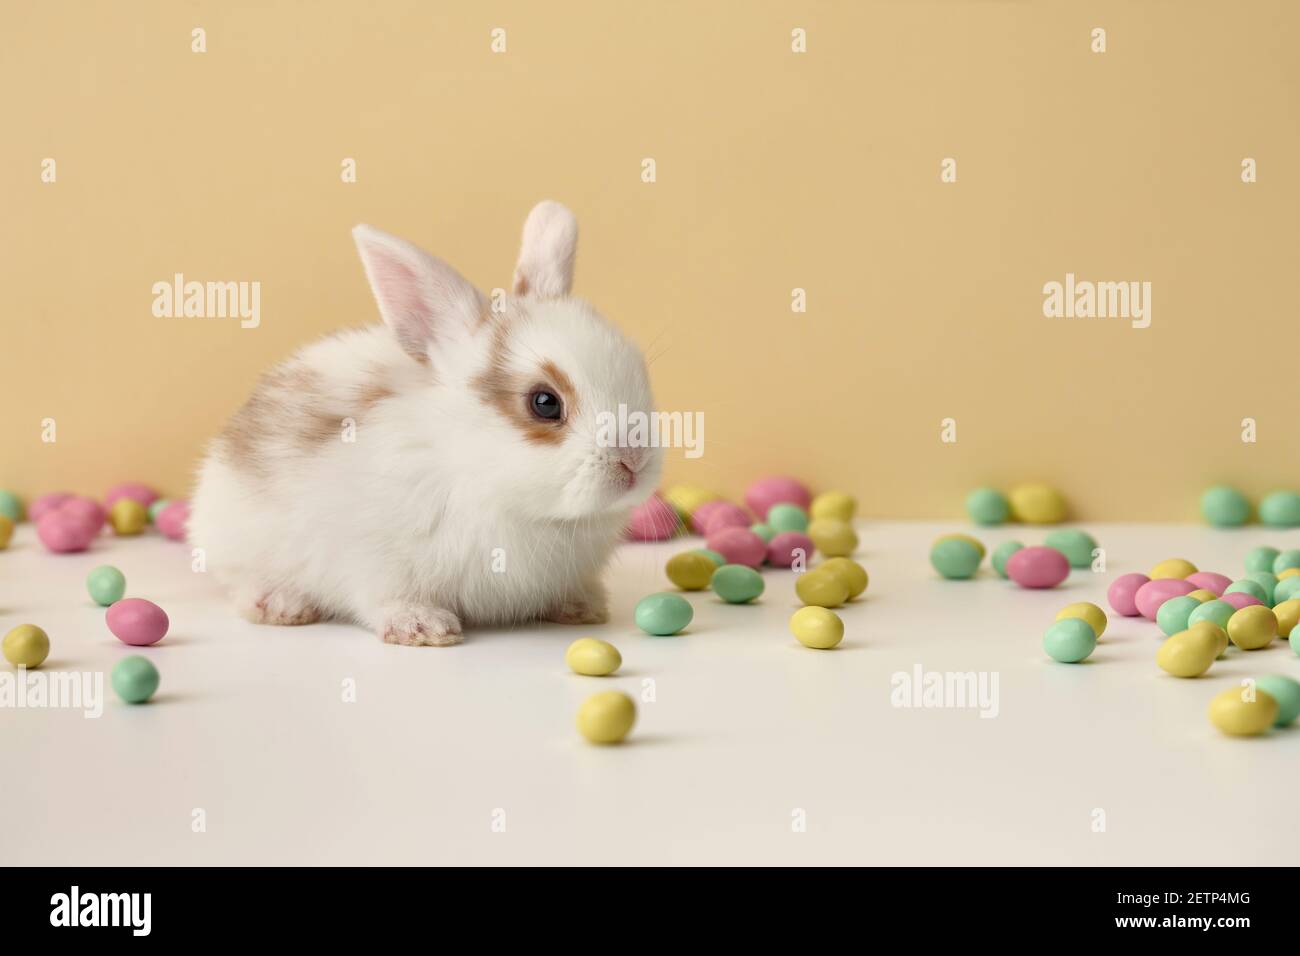 Cute white Easter bunny rabbit with colorful sweets on beige background Stock Photo